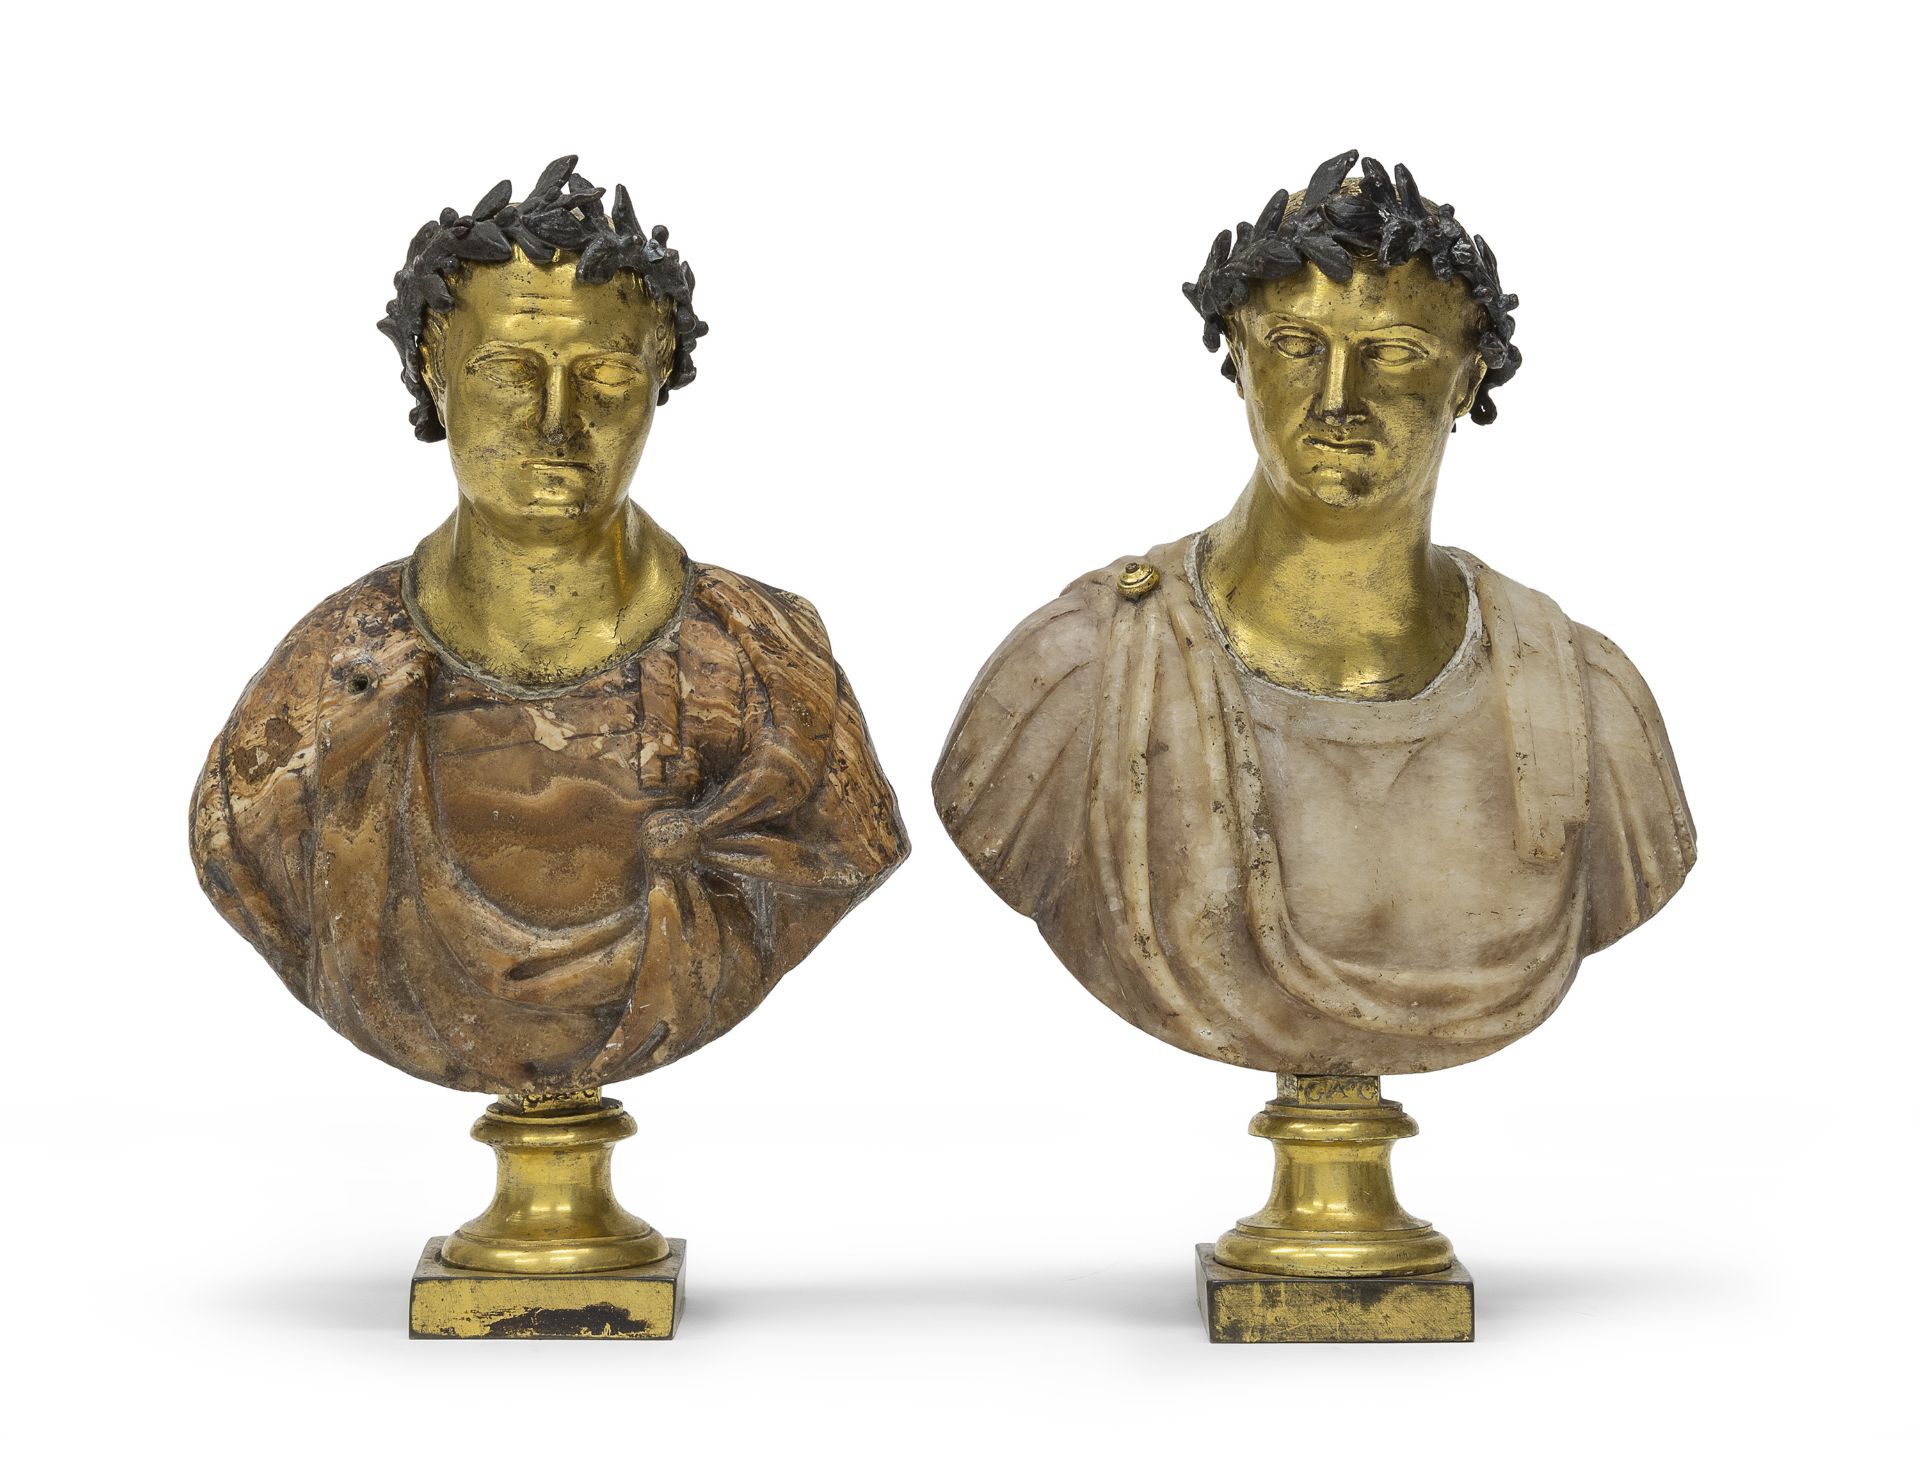 PAIR OF MARBLE AND BRONZE BUSTS END OF THE 18TH CENTURY